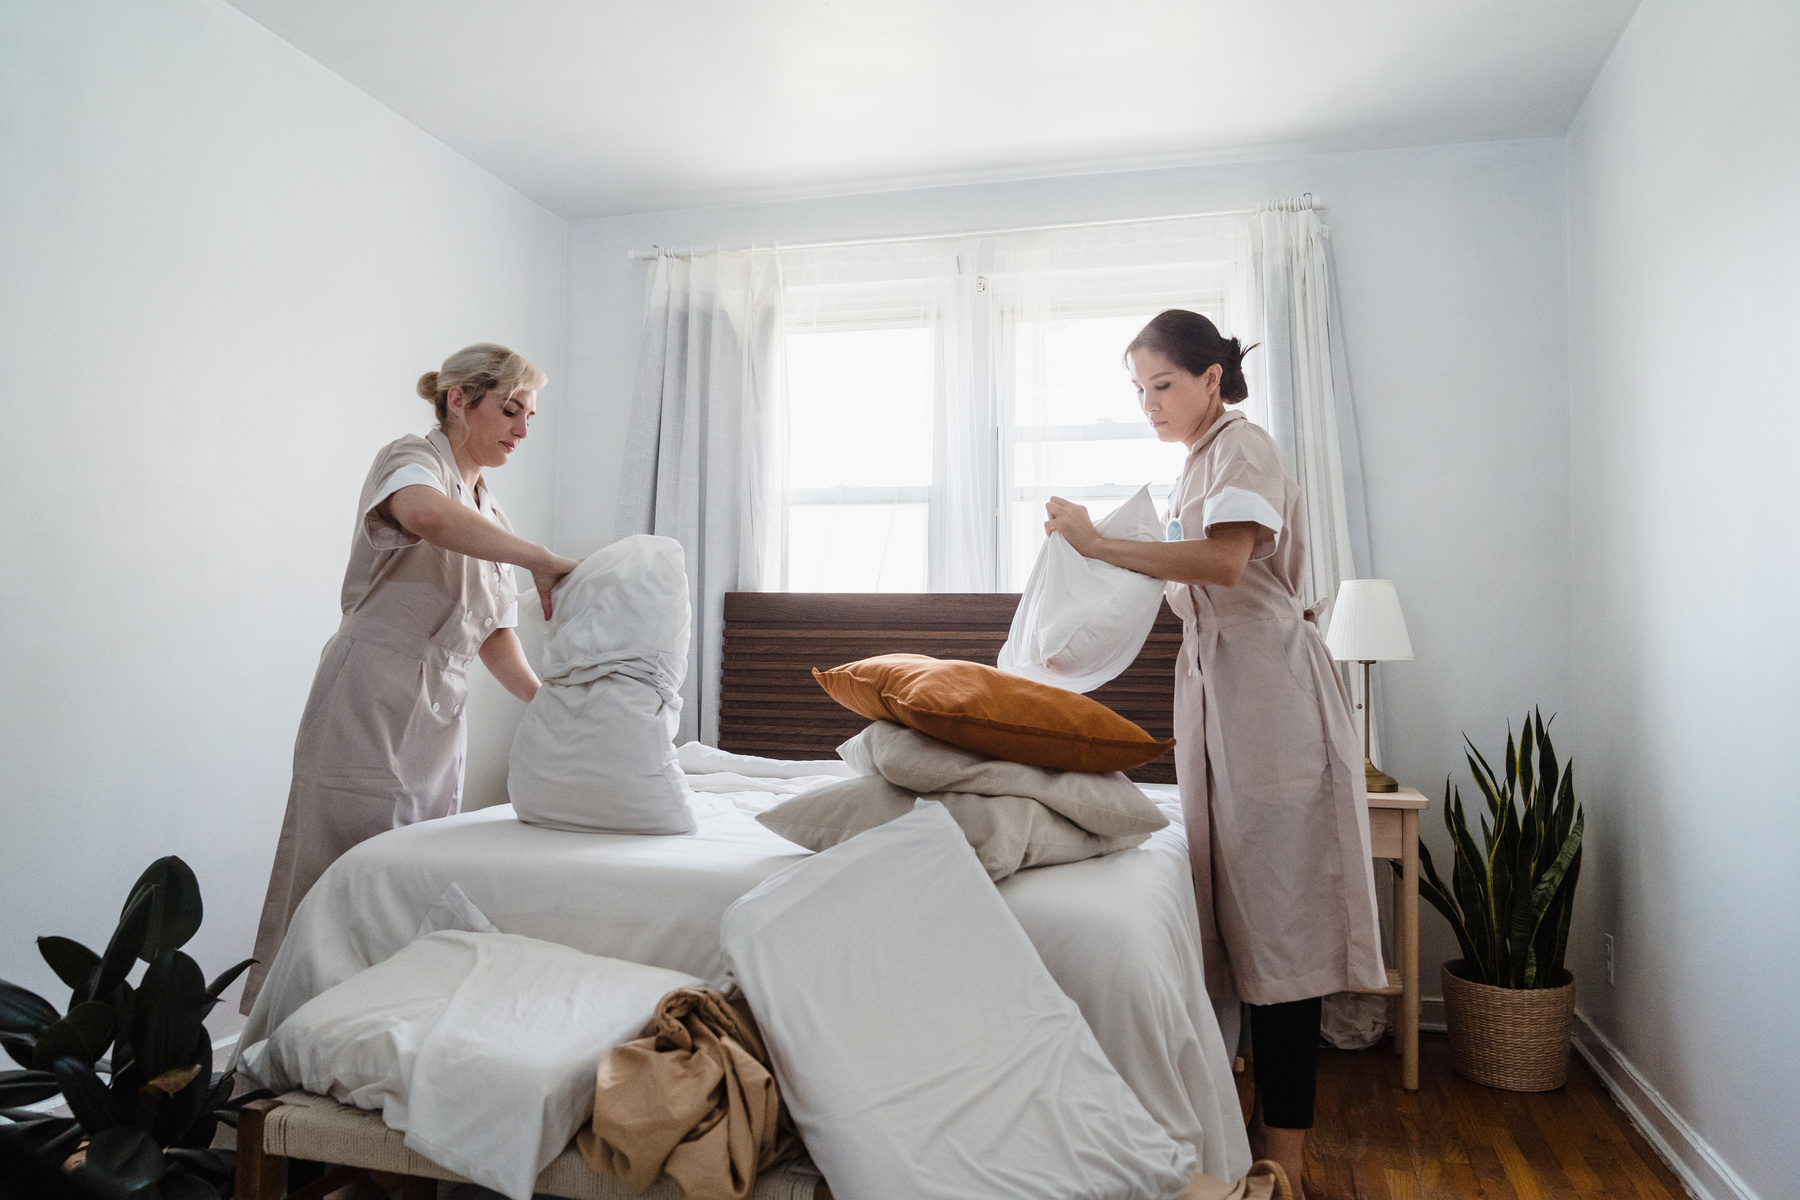 Housekeepers Tidying up a Bedroom